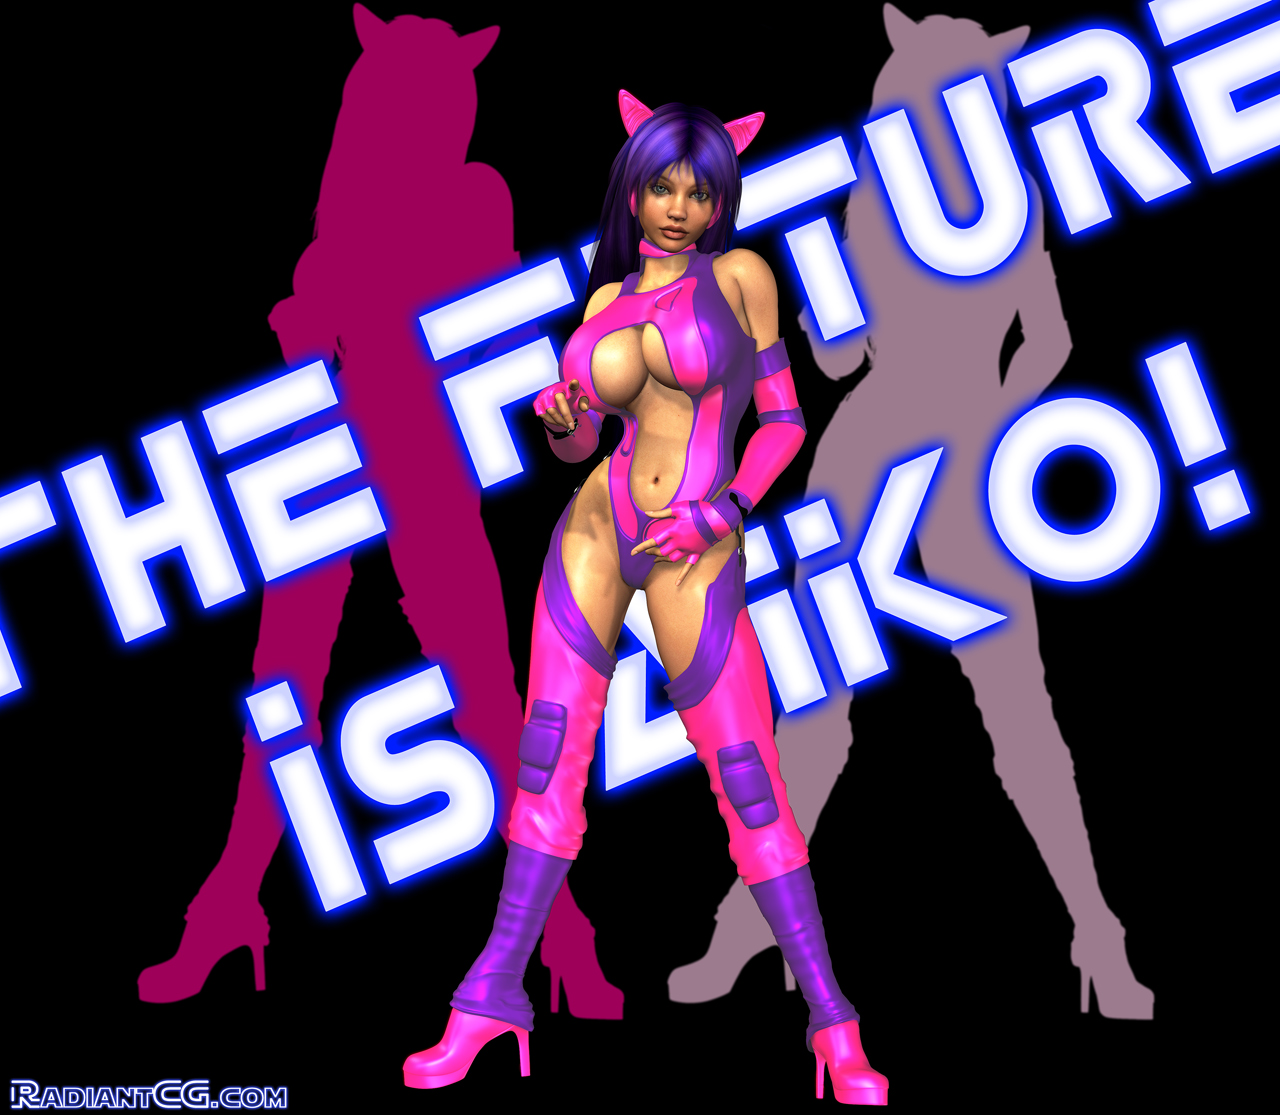 The Future Is Aiko!